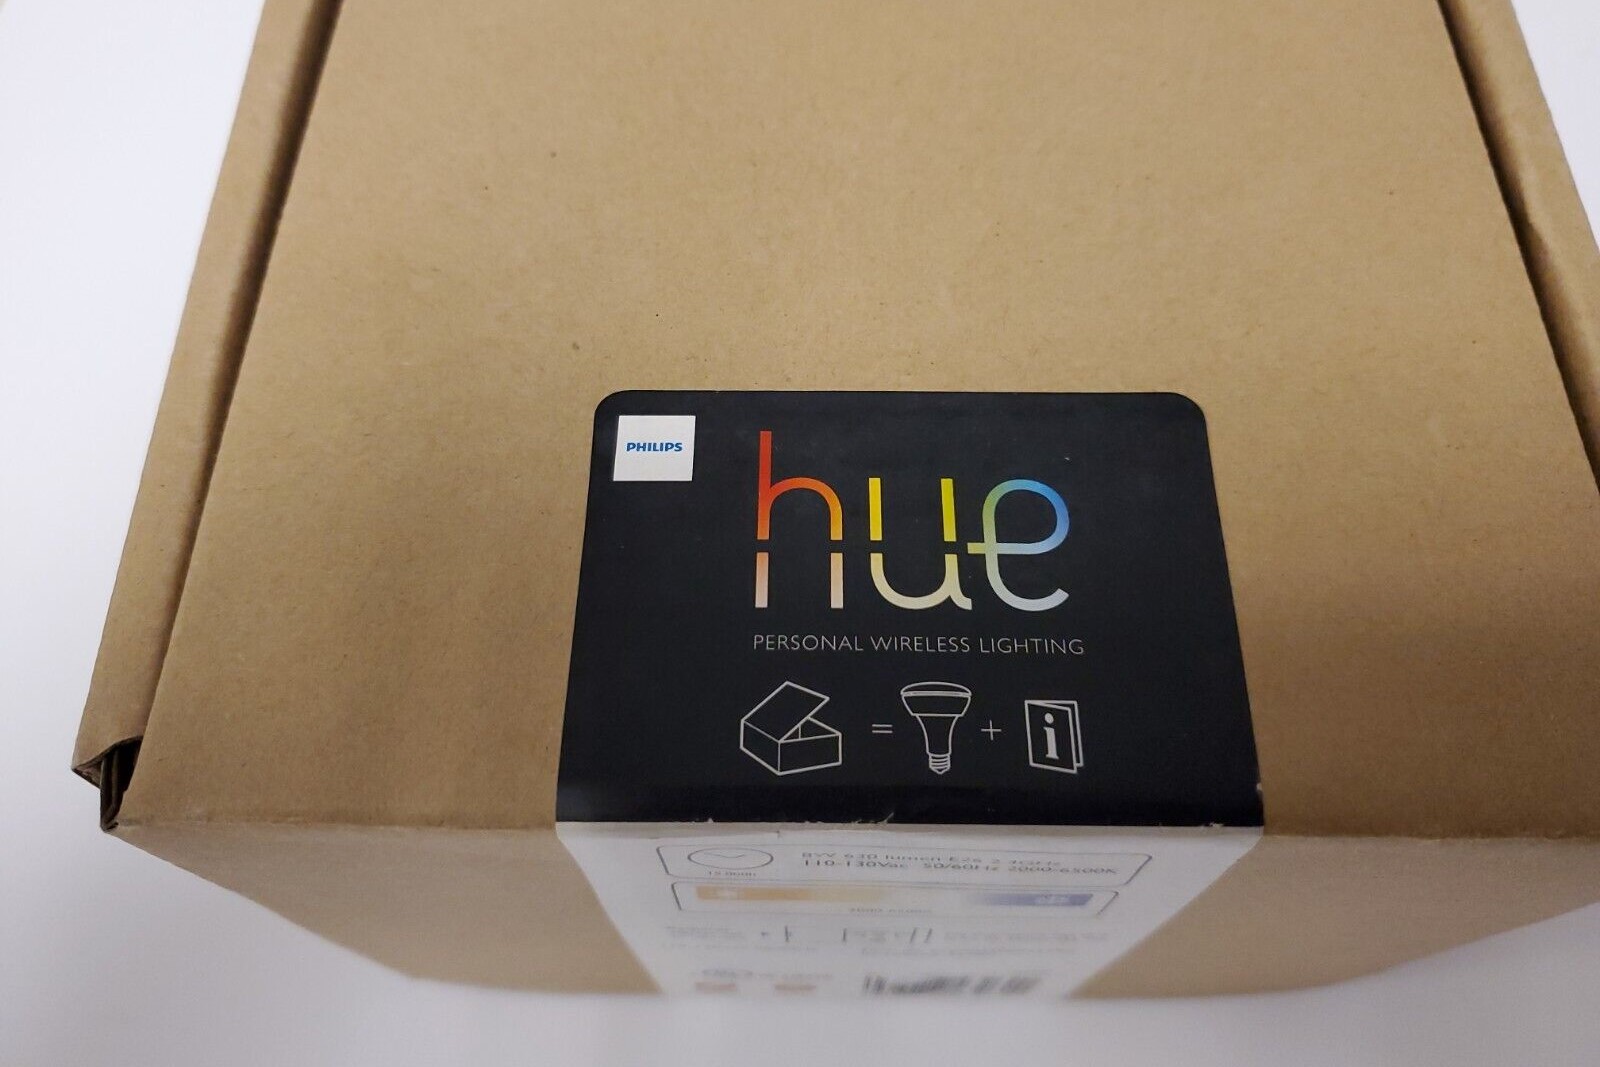 Why Can’t Philips Hue Be Shipped To California